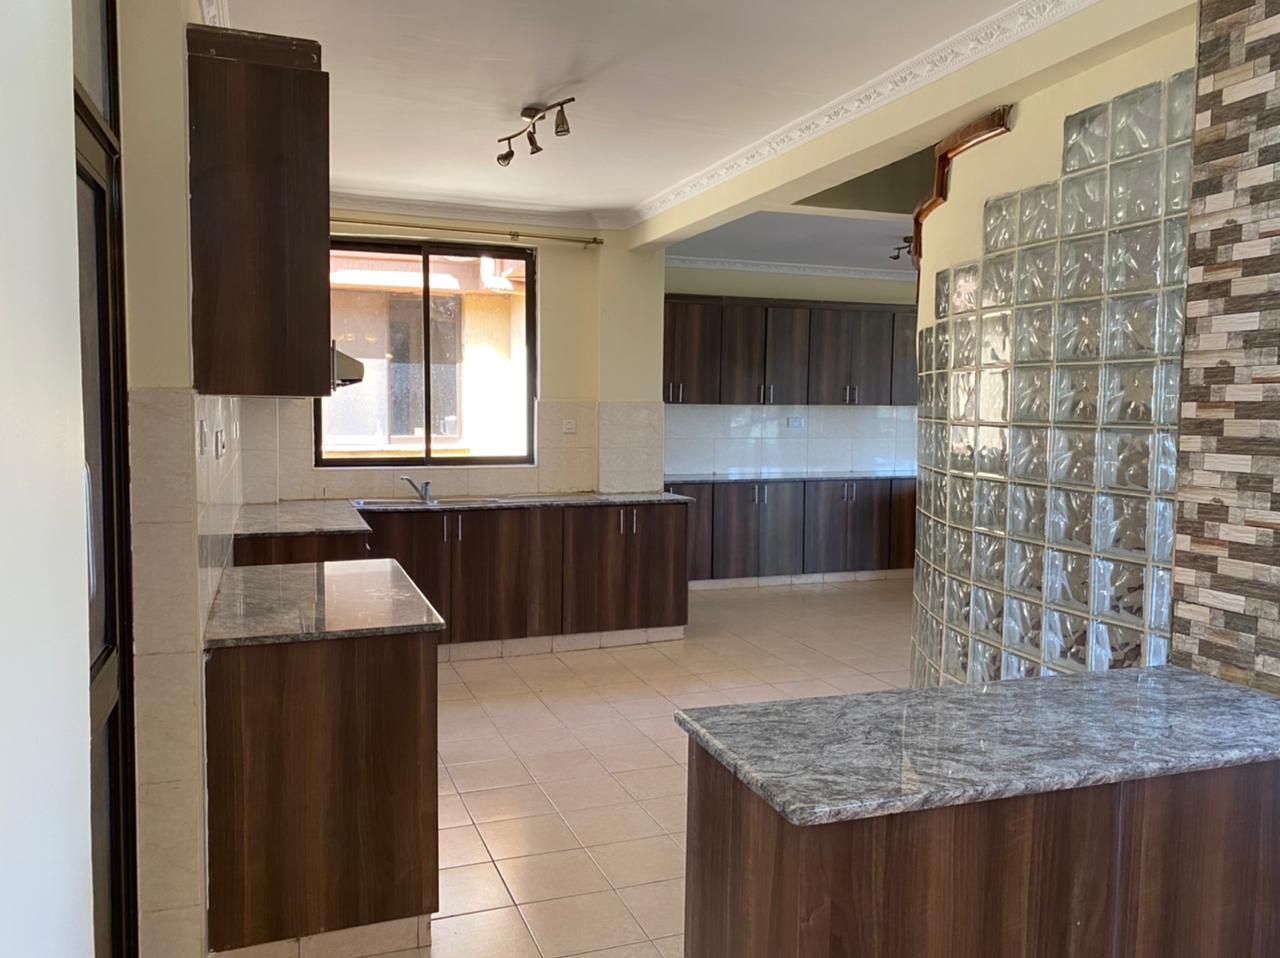 4 Bedroom All Ensuite Apartment for Rent in Kilimani at Ksh200k with exciting amenities  (5)